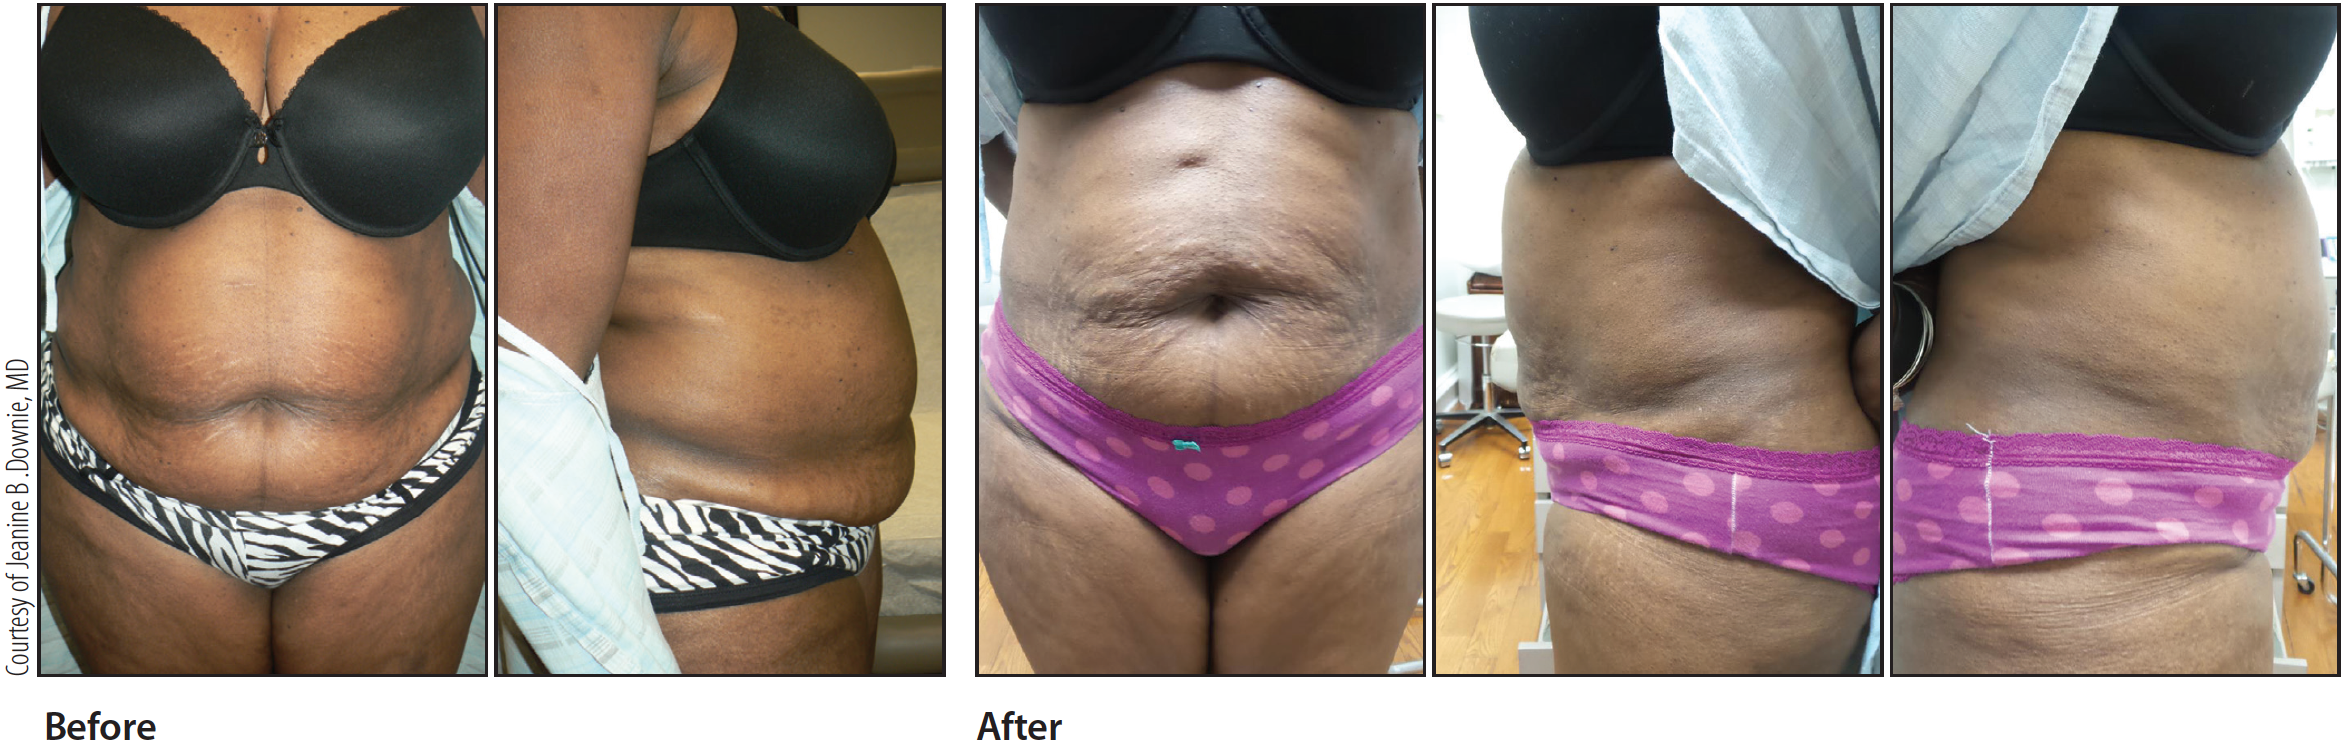 The Skinny on Non-Invasive Fat Reduction: The Case for an a la